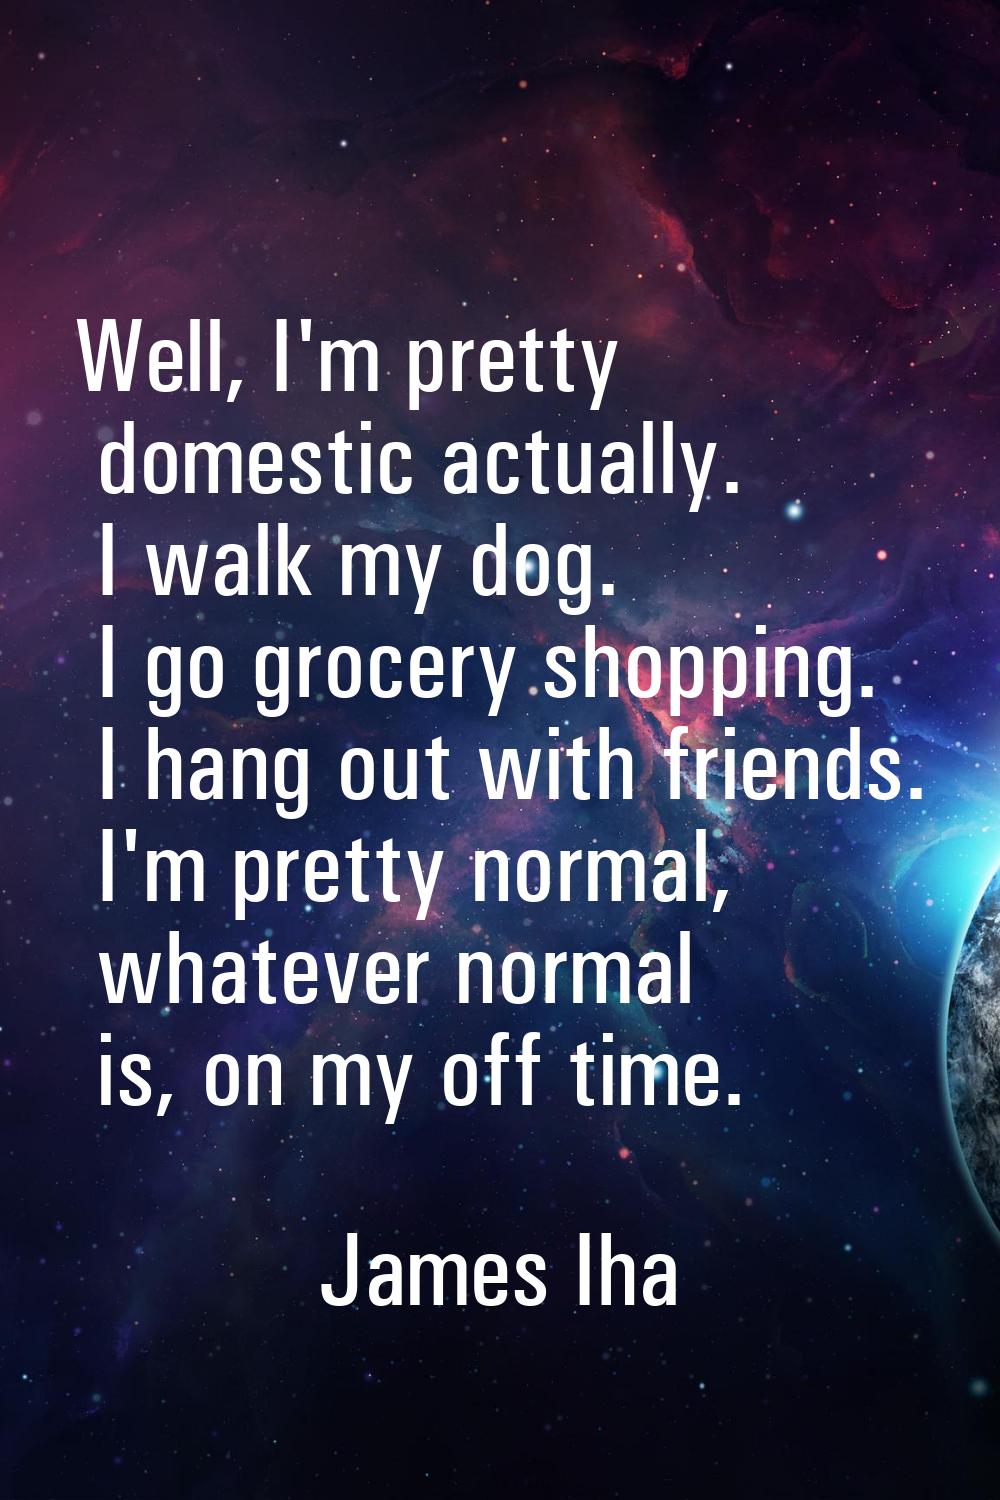 Well, I'm pretty domestic actually. I walk my dog. I go grocery shopping. I hang out with friends. 